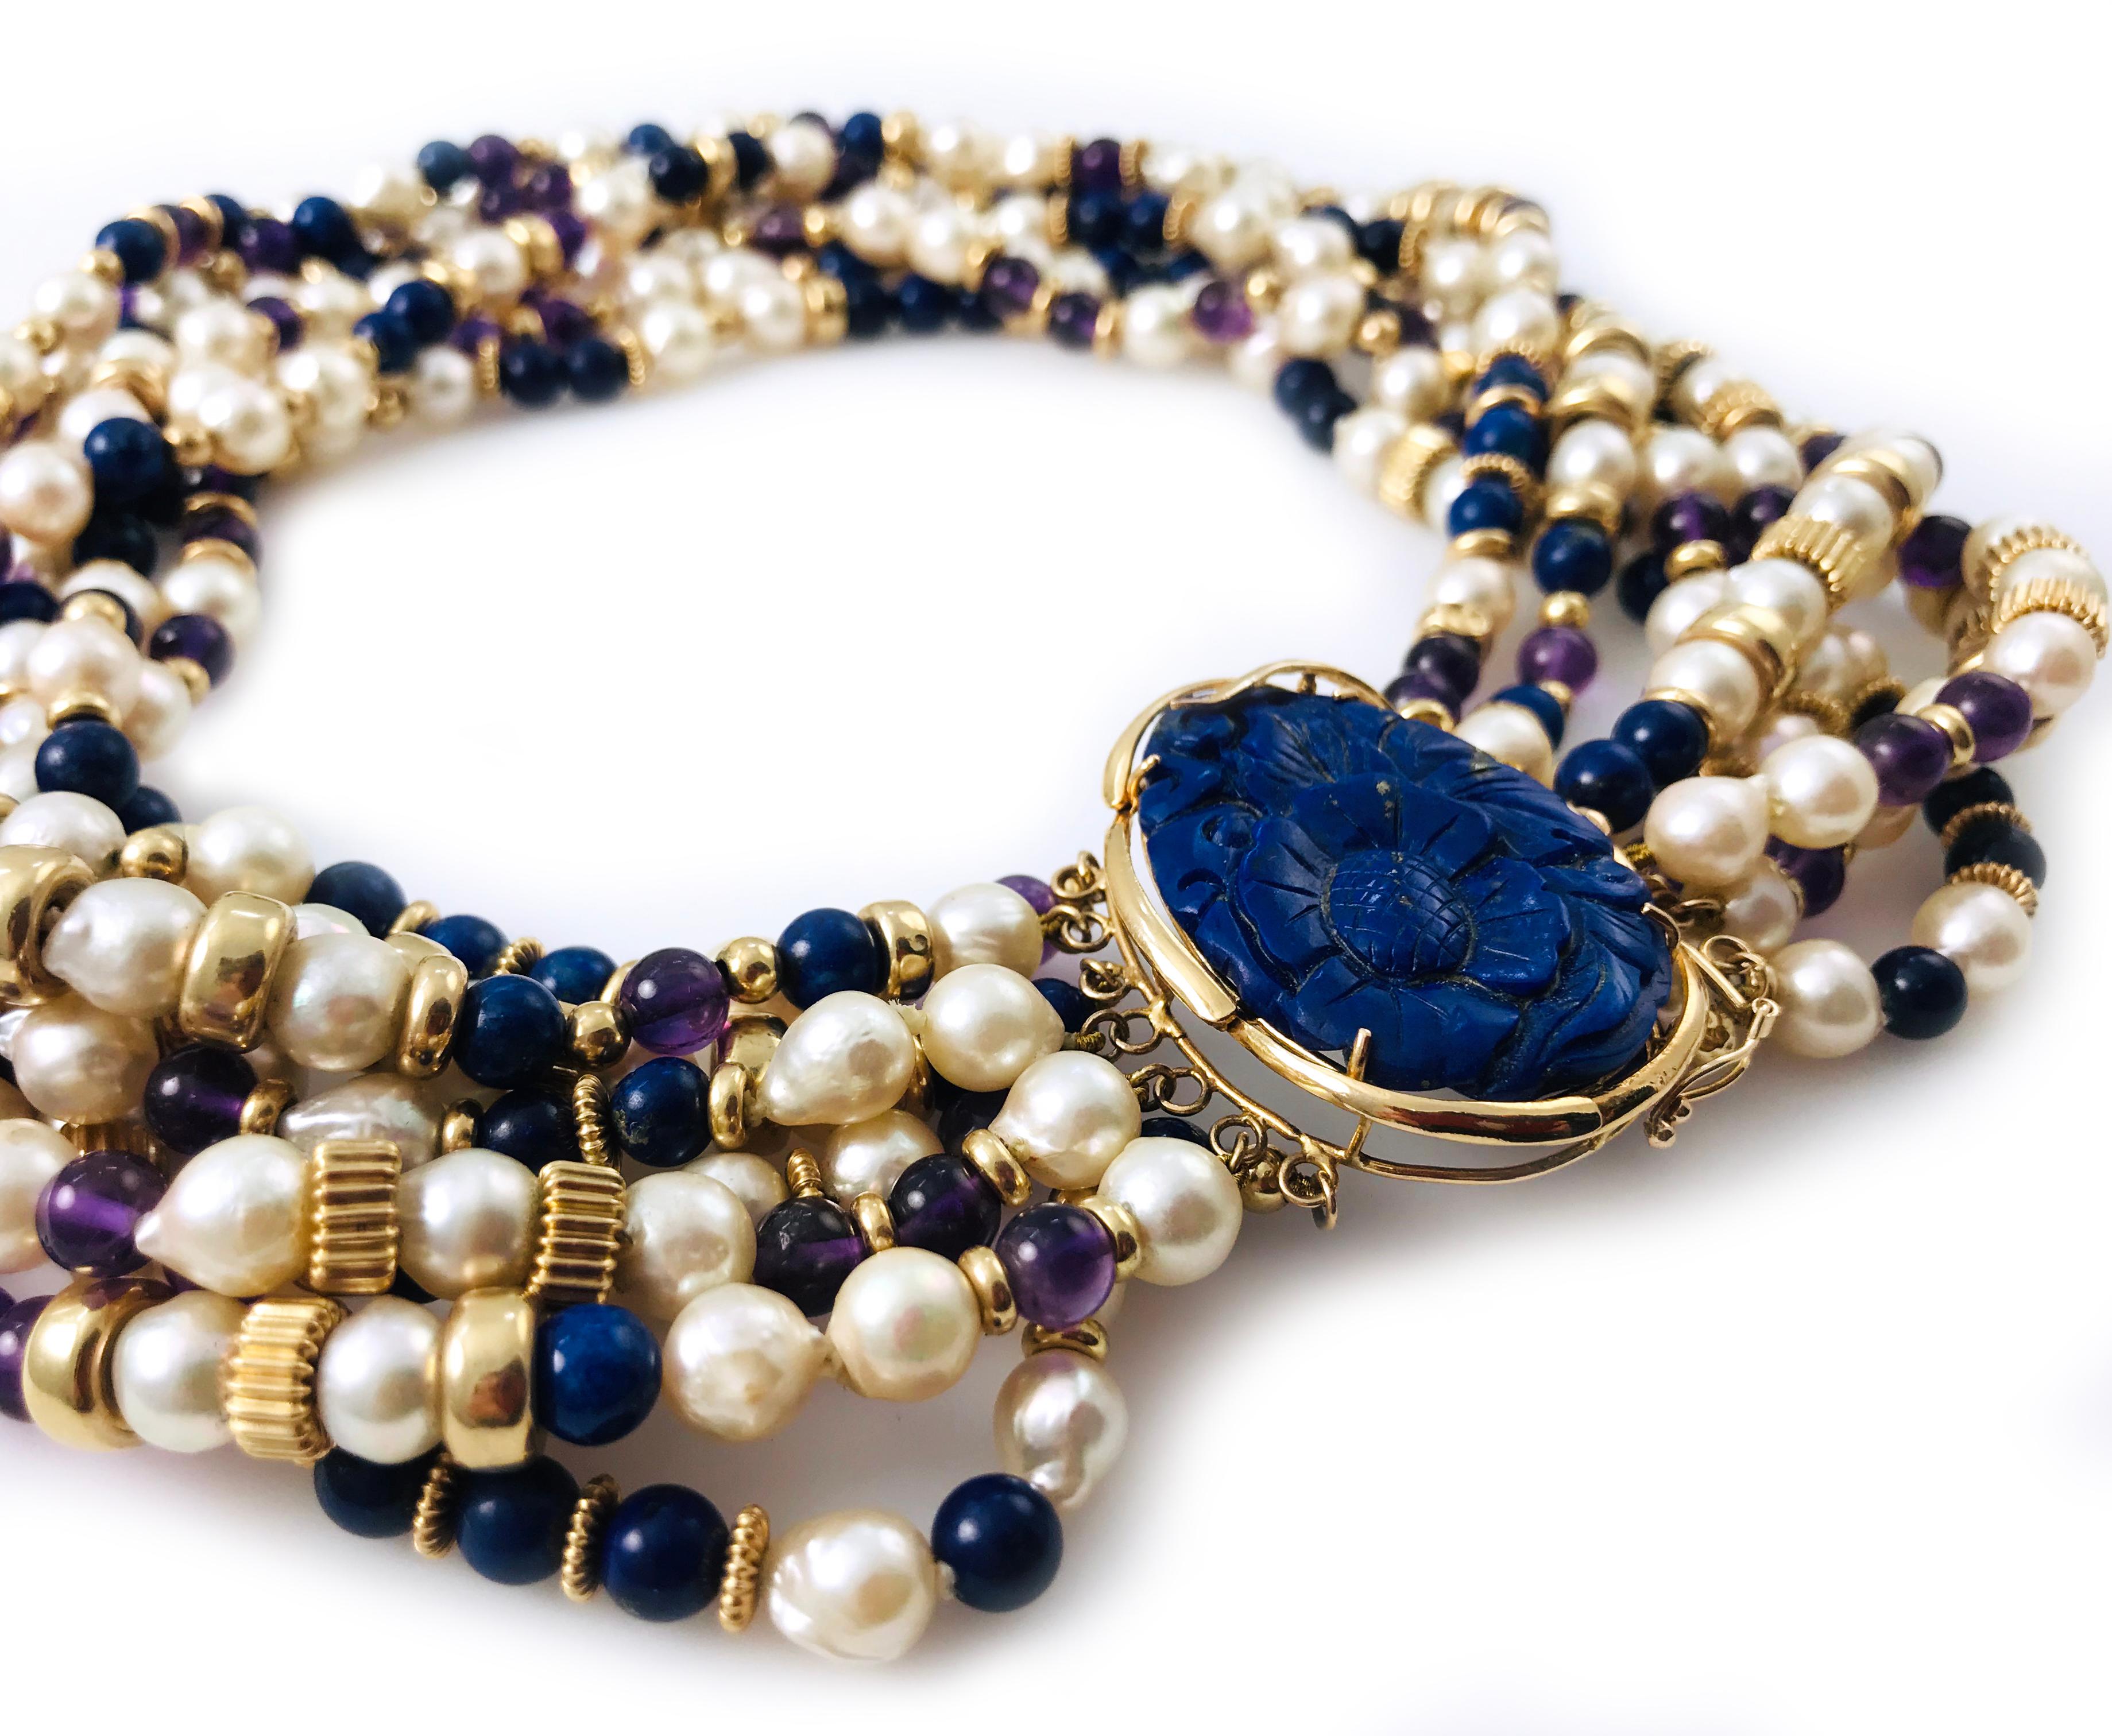 Lapis Lazuli Amethyst Pearl Choker Necklace. The center oval Lapis Lazuli has a craved flower motif. The necklace features eight strands of Baroque pearls, gold roundel beads, amethyst and lapis lazuli. The necklace is 17 inches long.